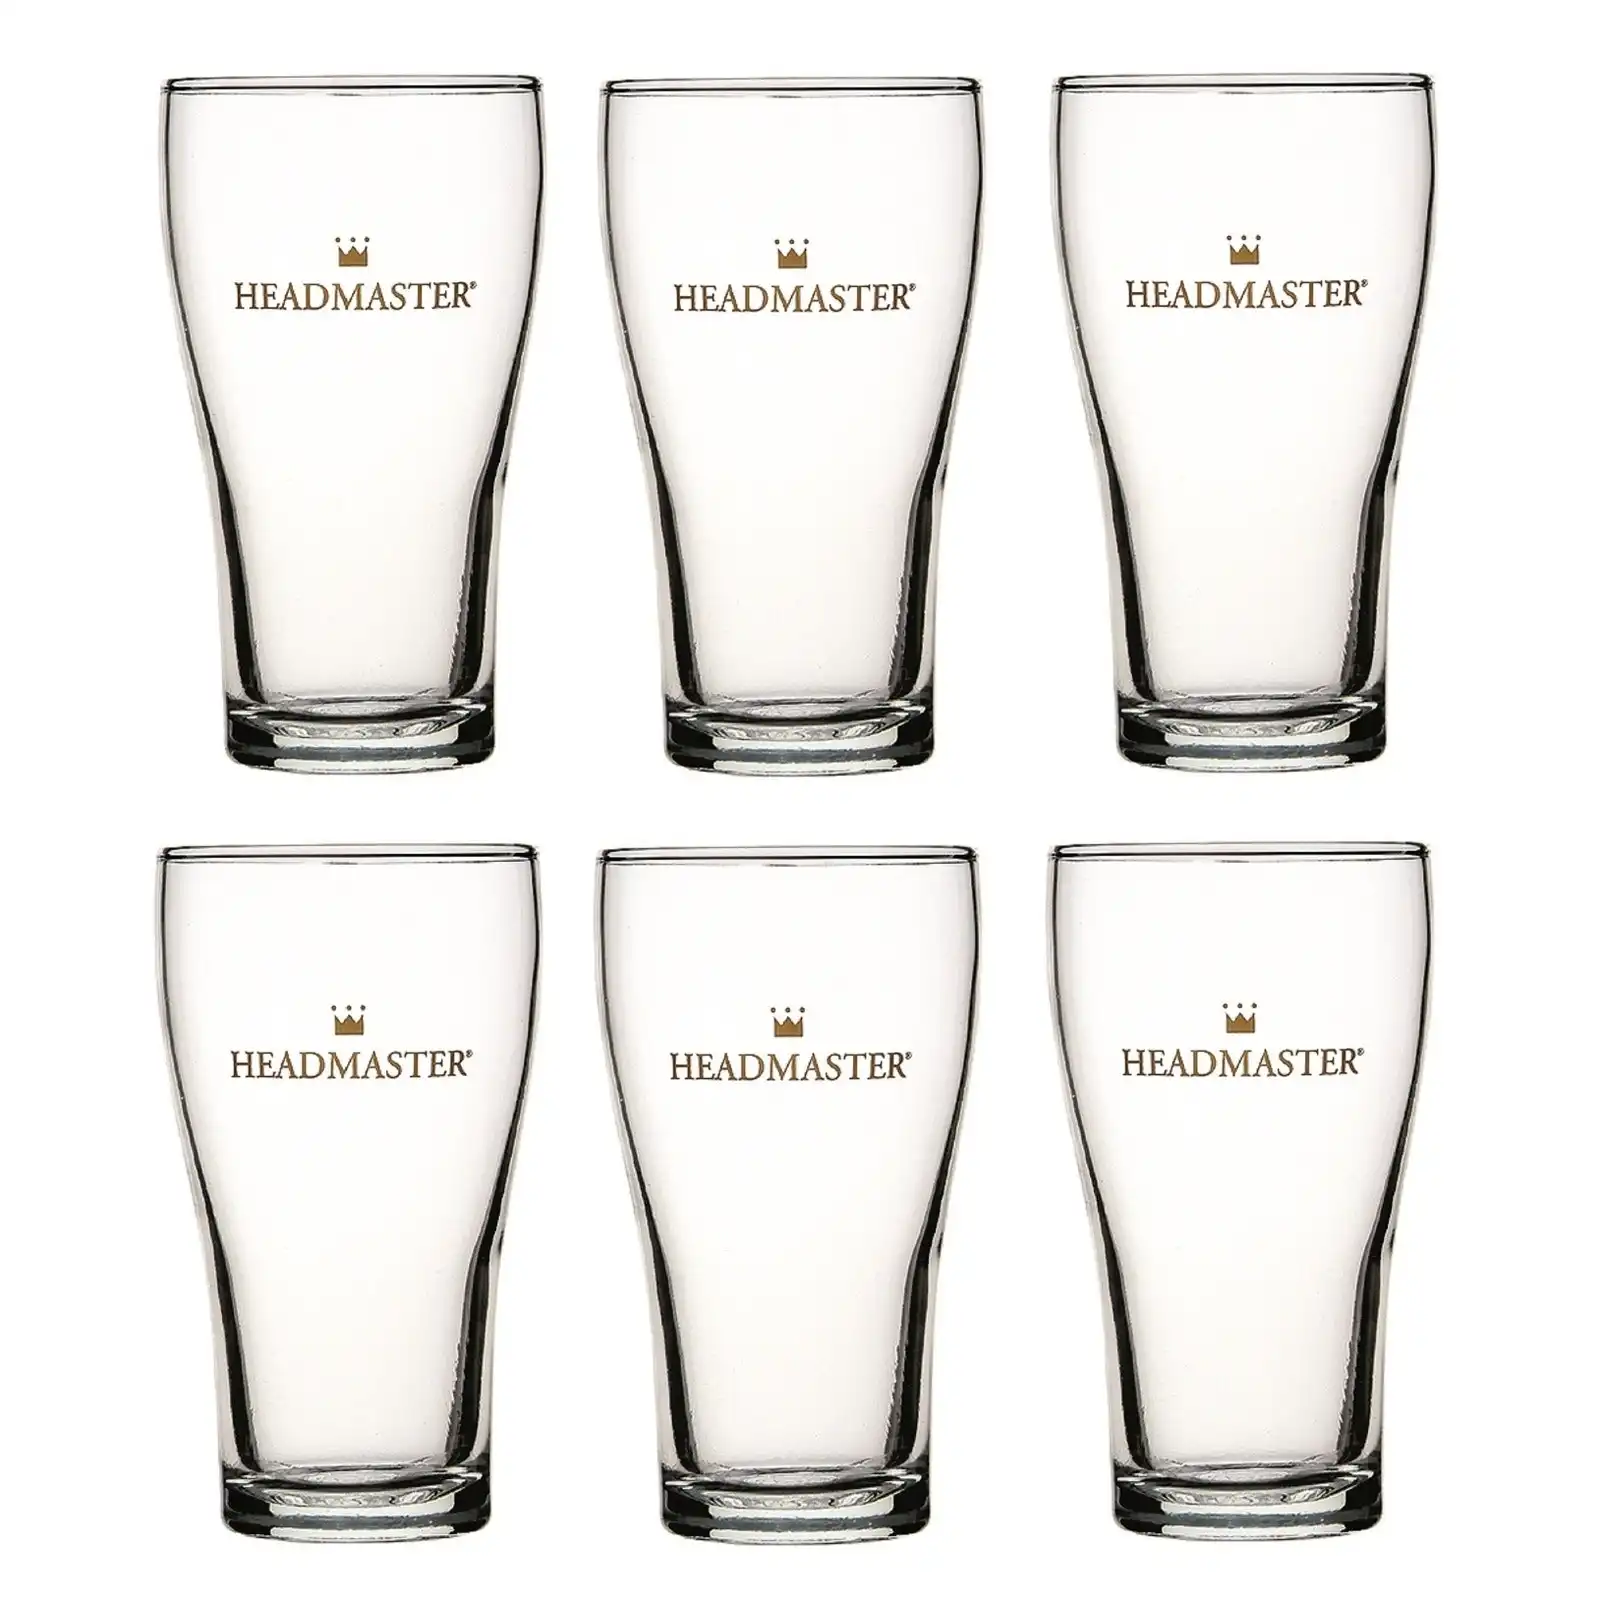 CROWN NUCLEATED Headmaster BEER CONICAL GLASSES 425ml - Set of 6